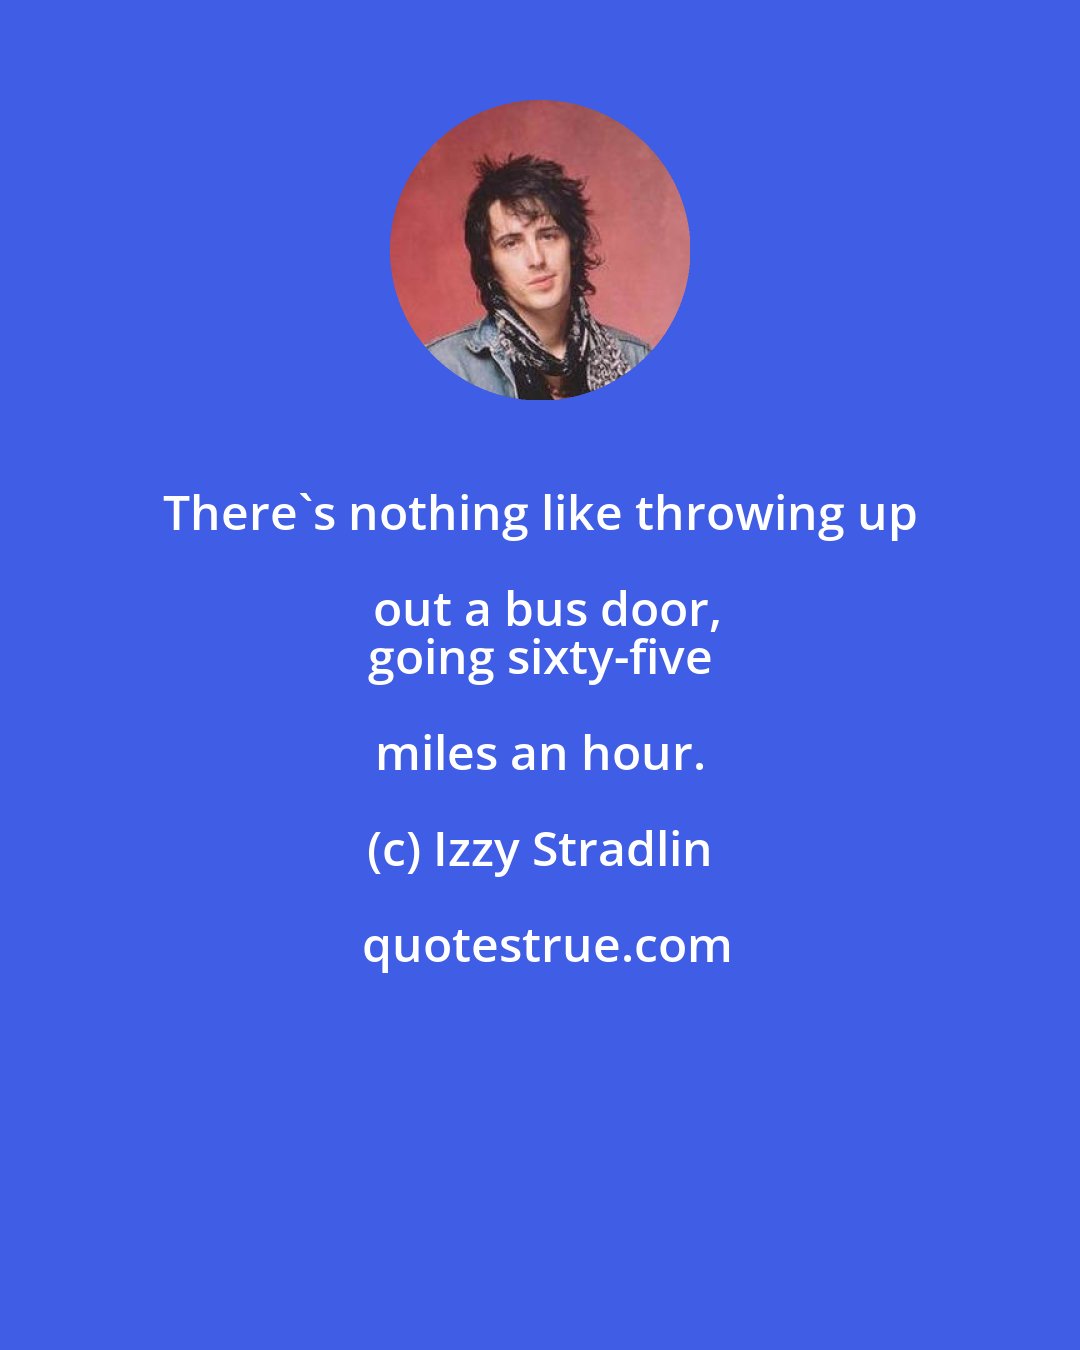 Izzy Stradlin: There's nothing like throwing up out a bus door,
 going sixty-five miles an hour.